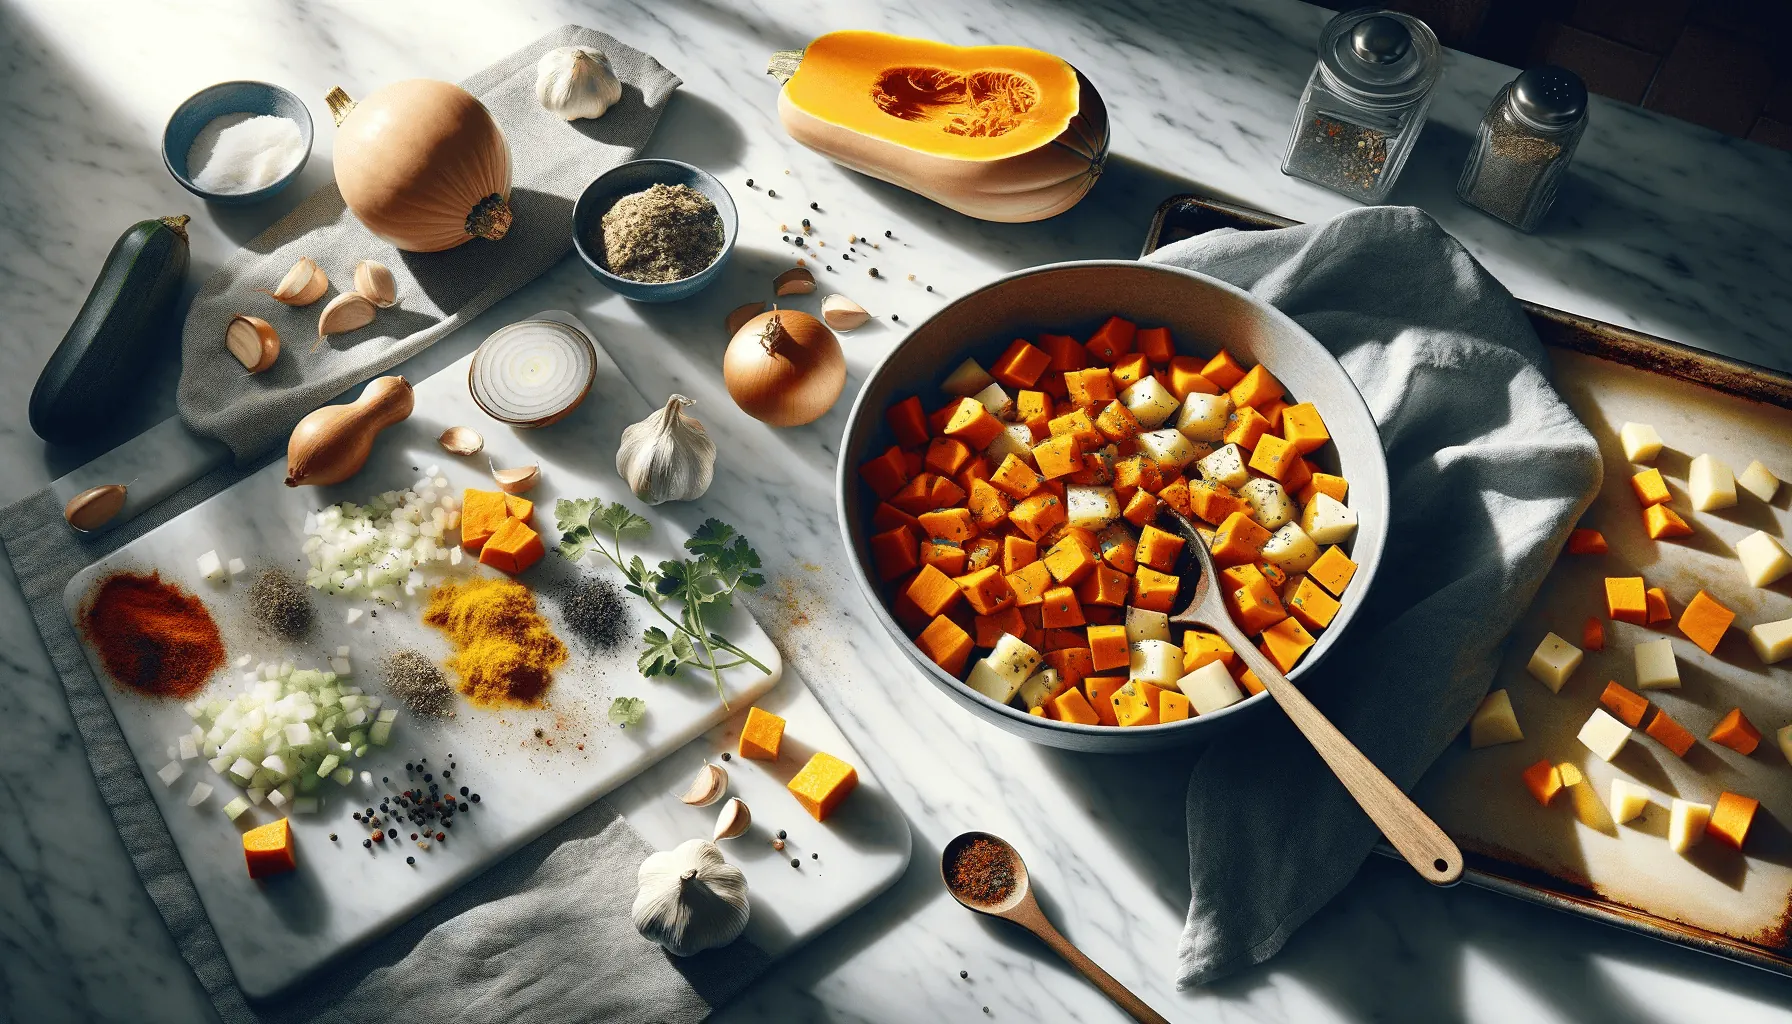 The making of butternut squash and sweet potato soup